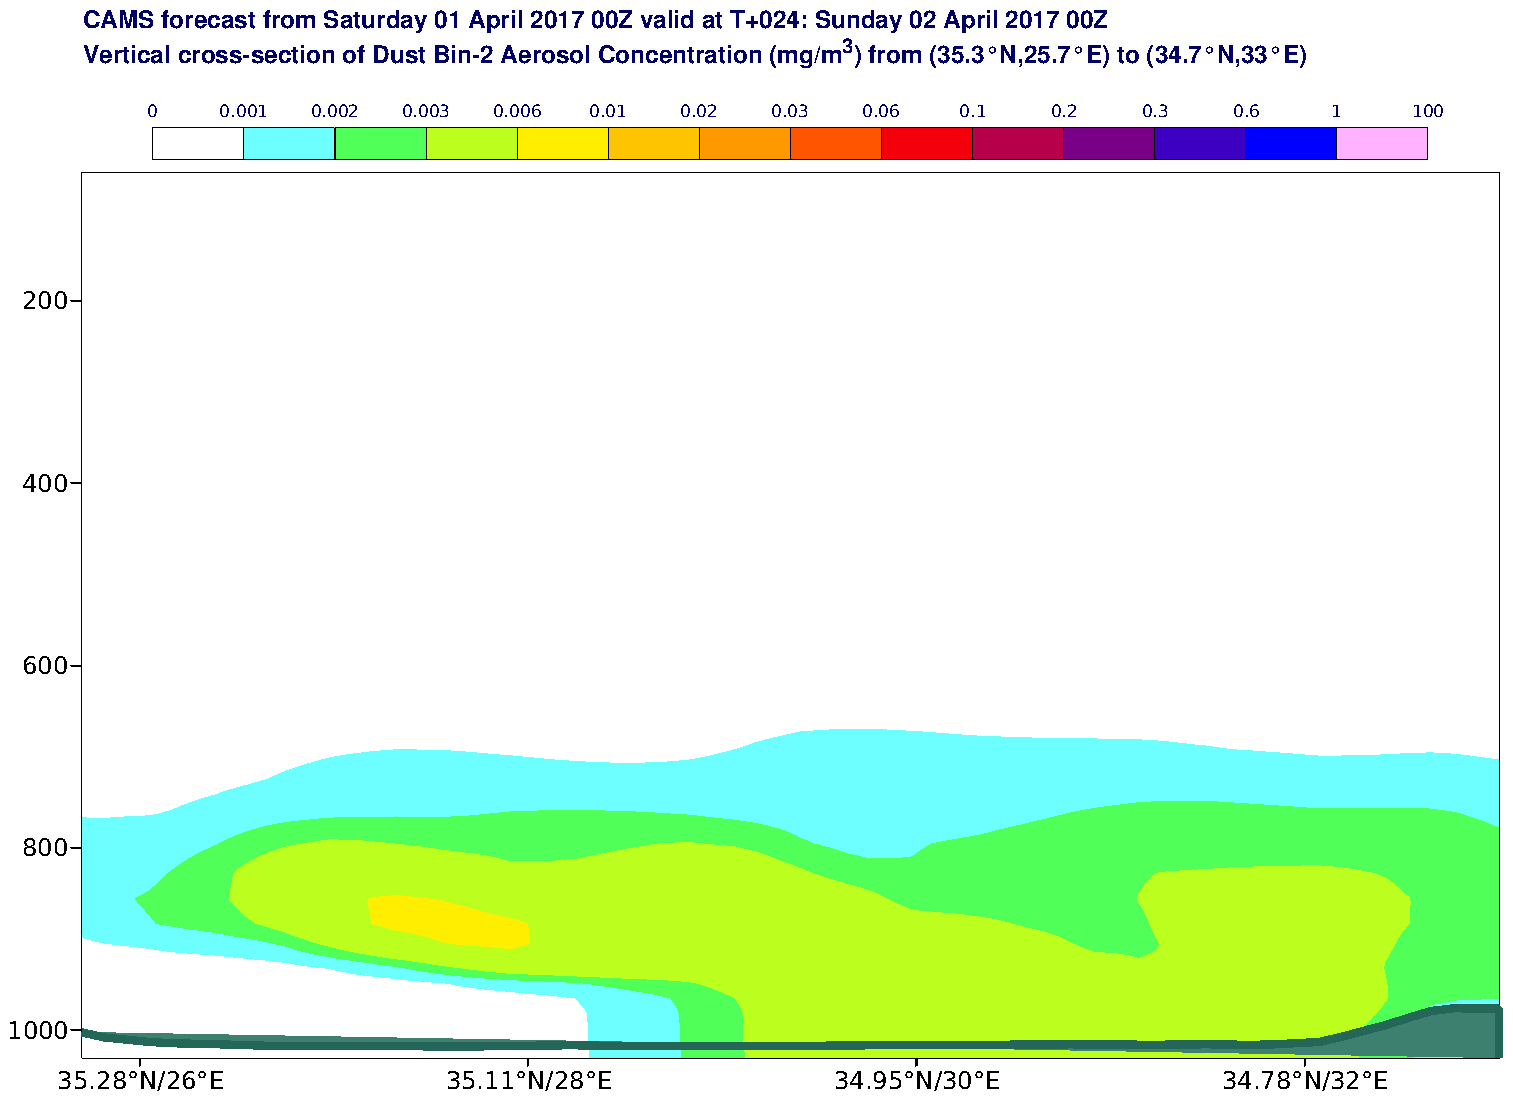 Vertical cross-section of Dust Bin-2 Aerosol Concentration (mg/m3) valid at T24 - 2017-04-02 00:00